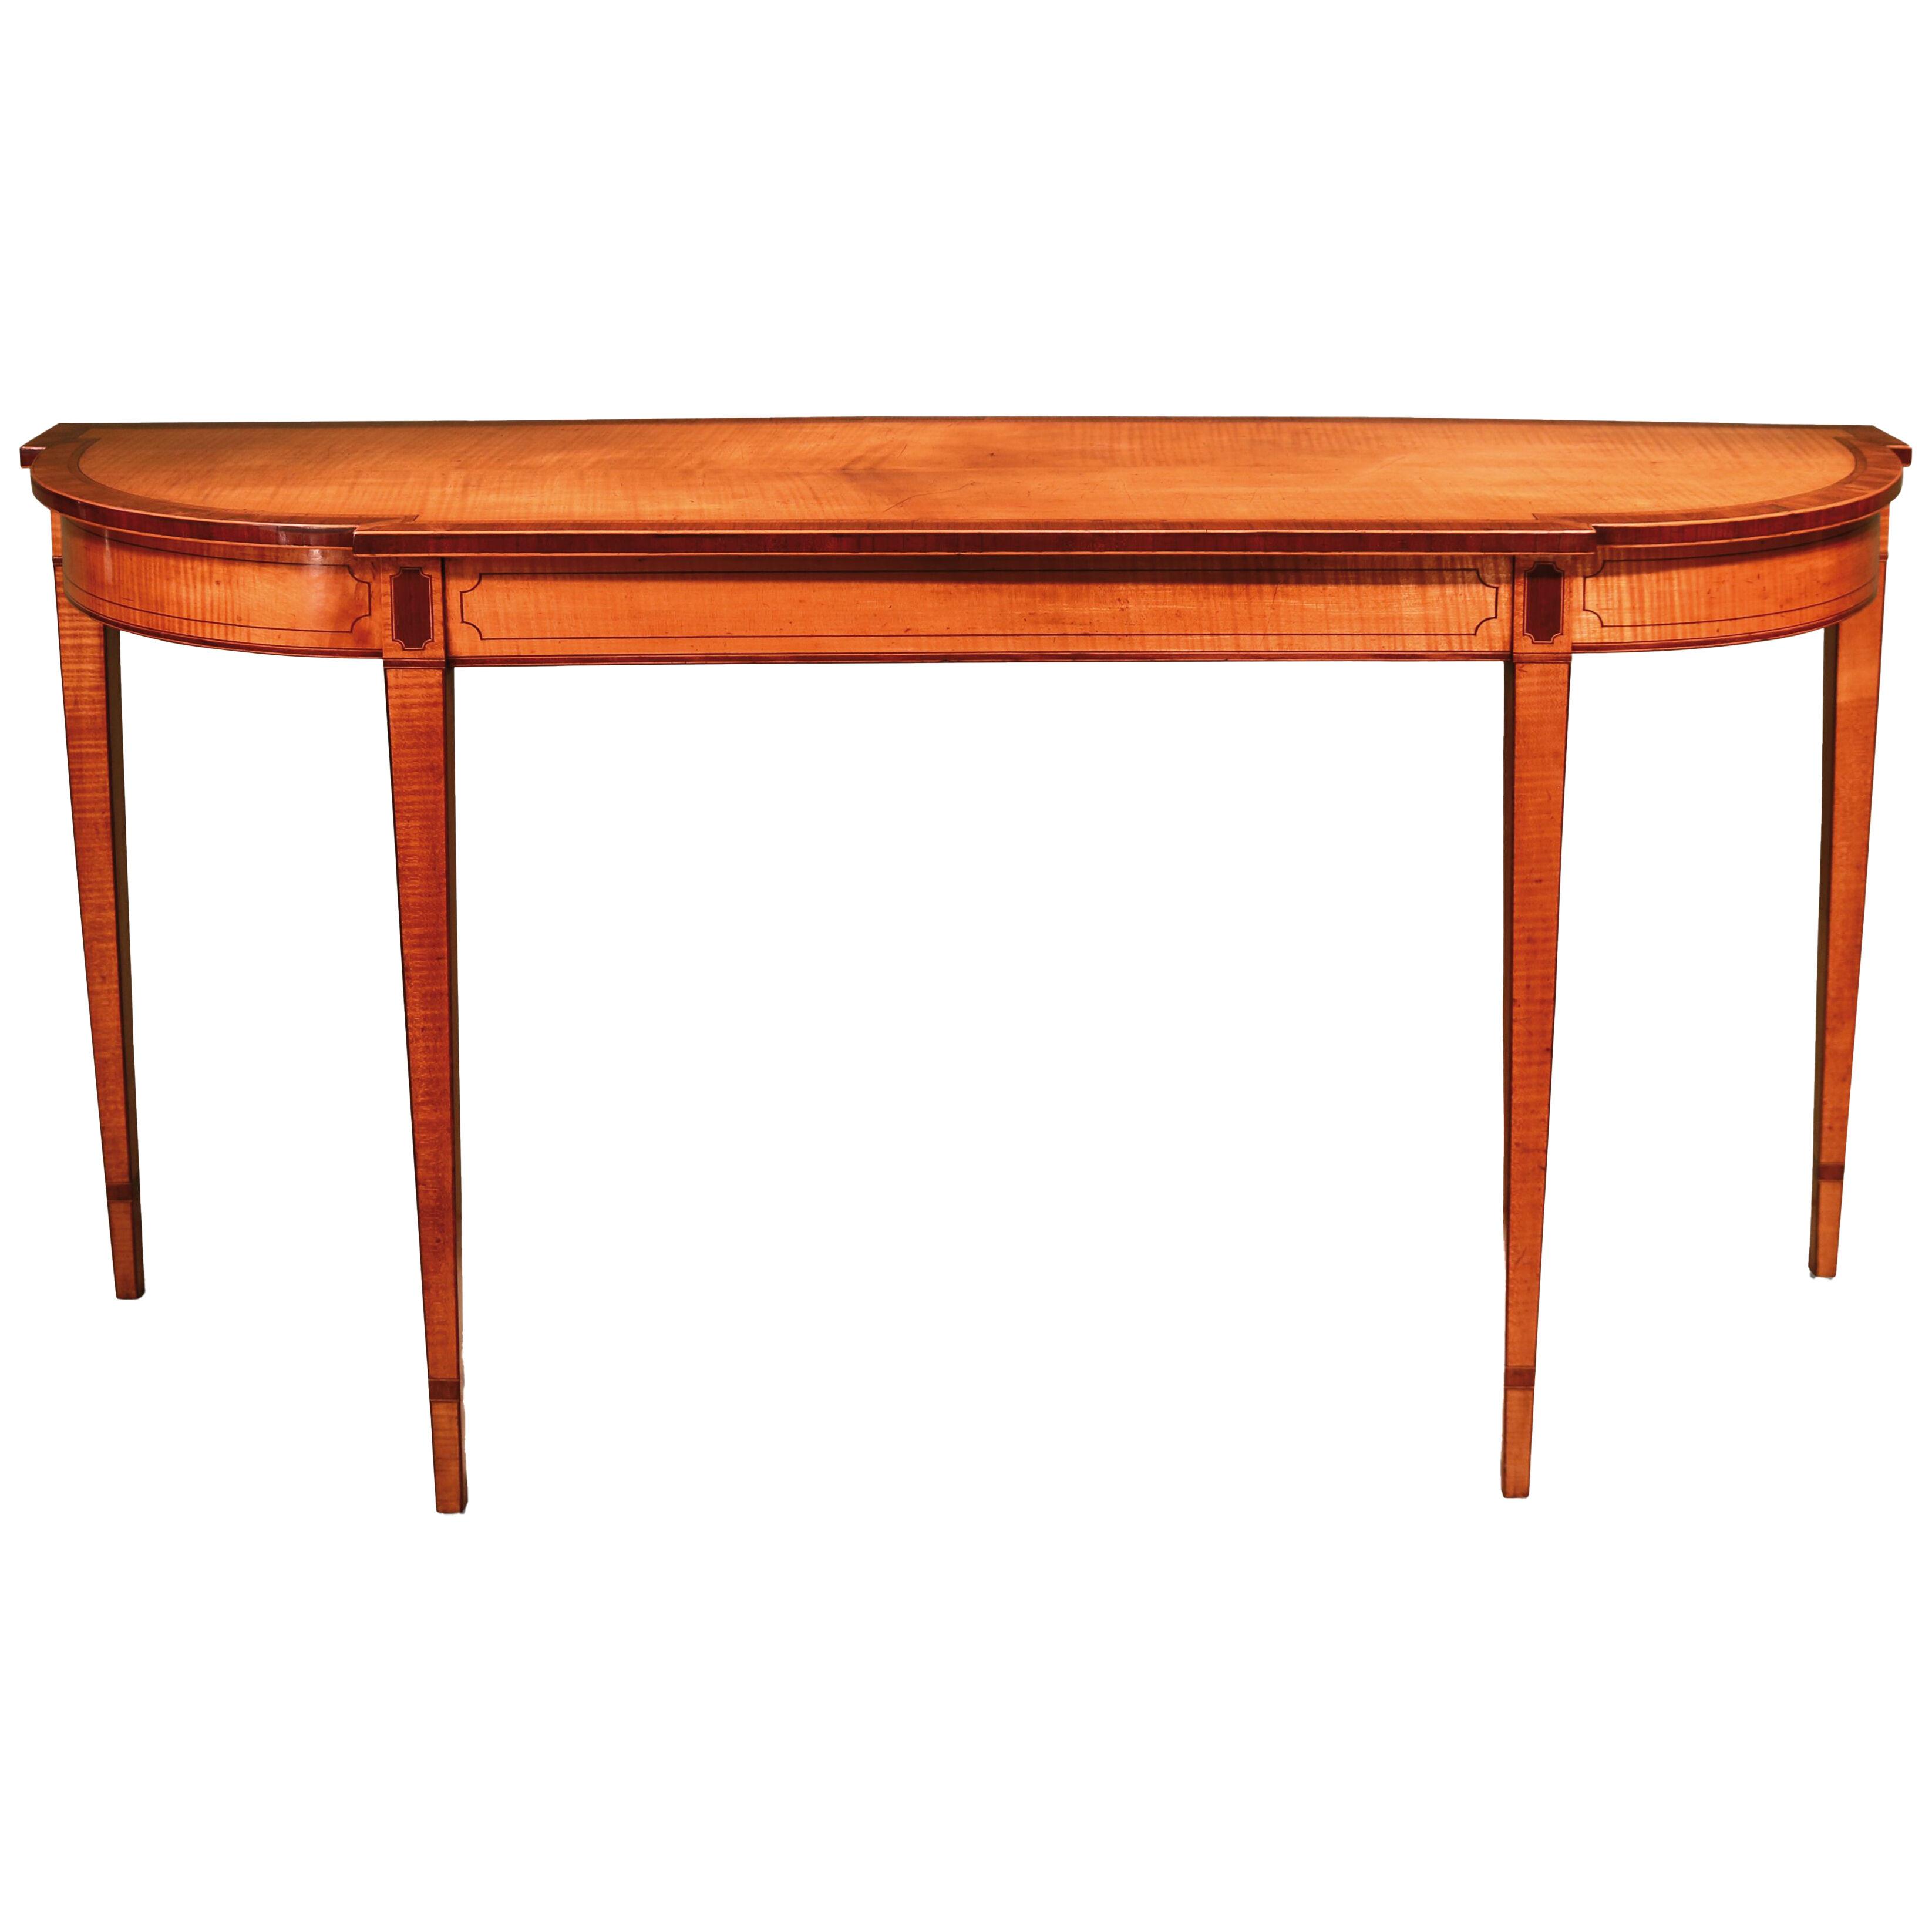 A Sheraton period satinwood console table